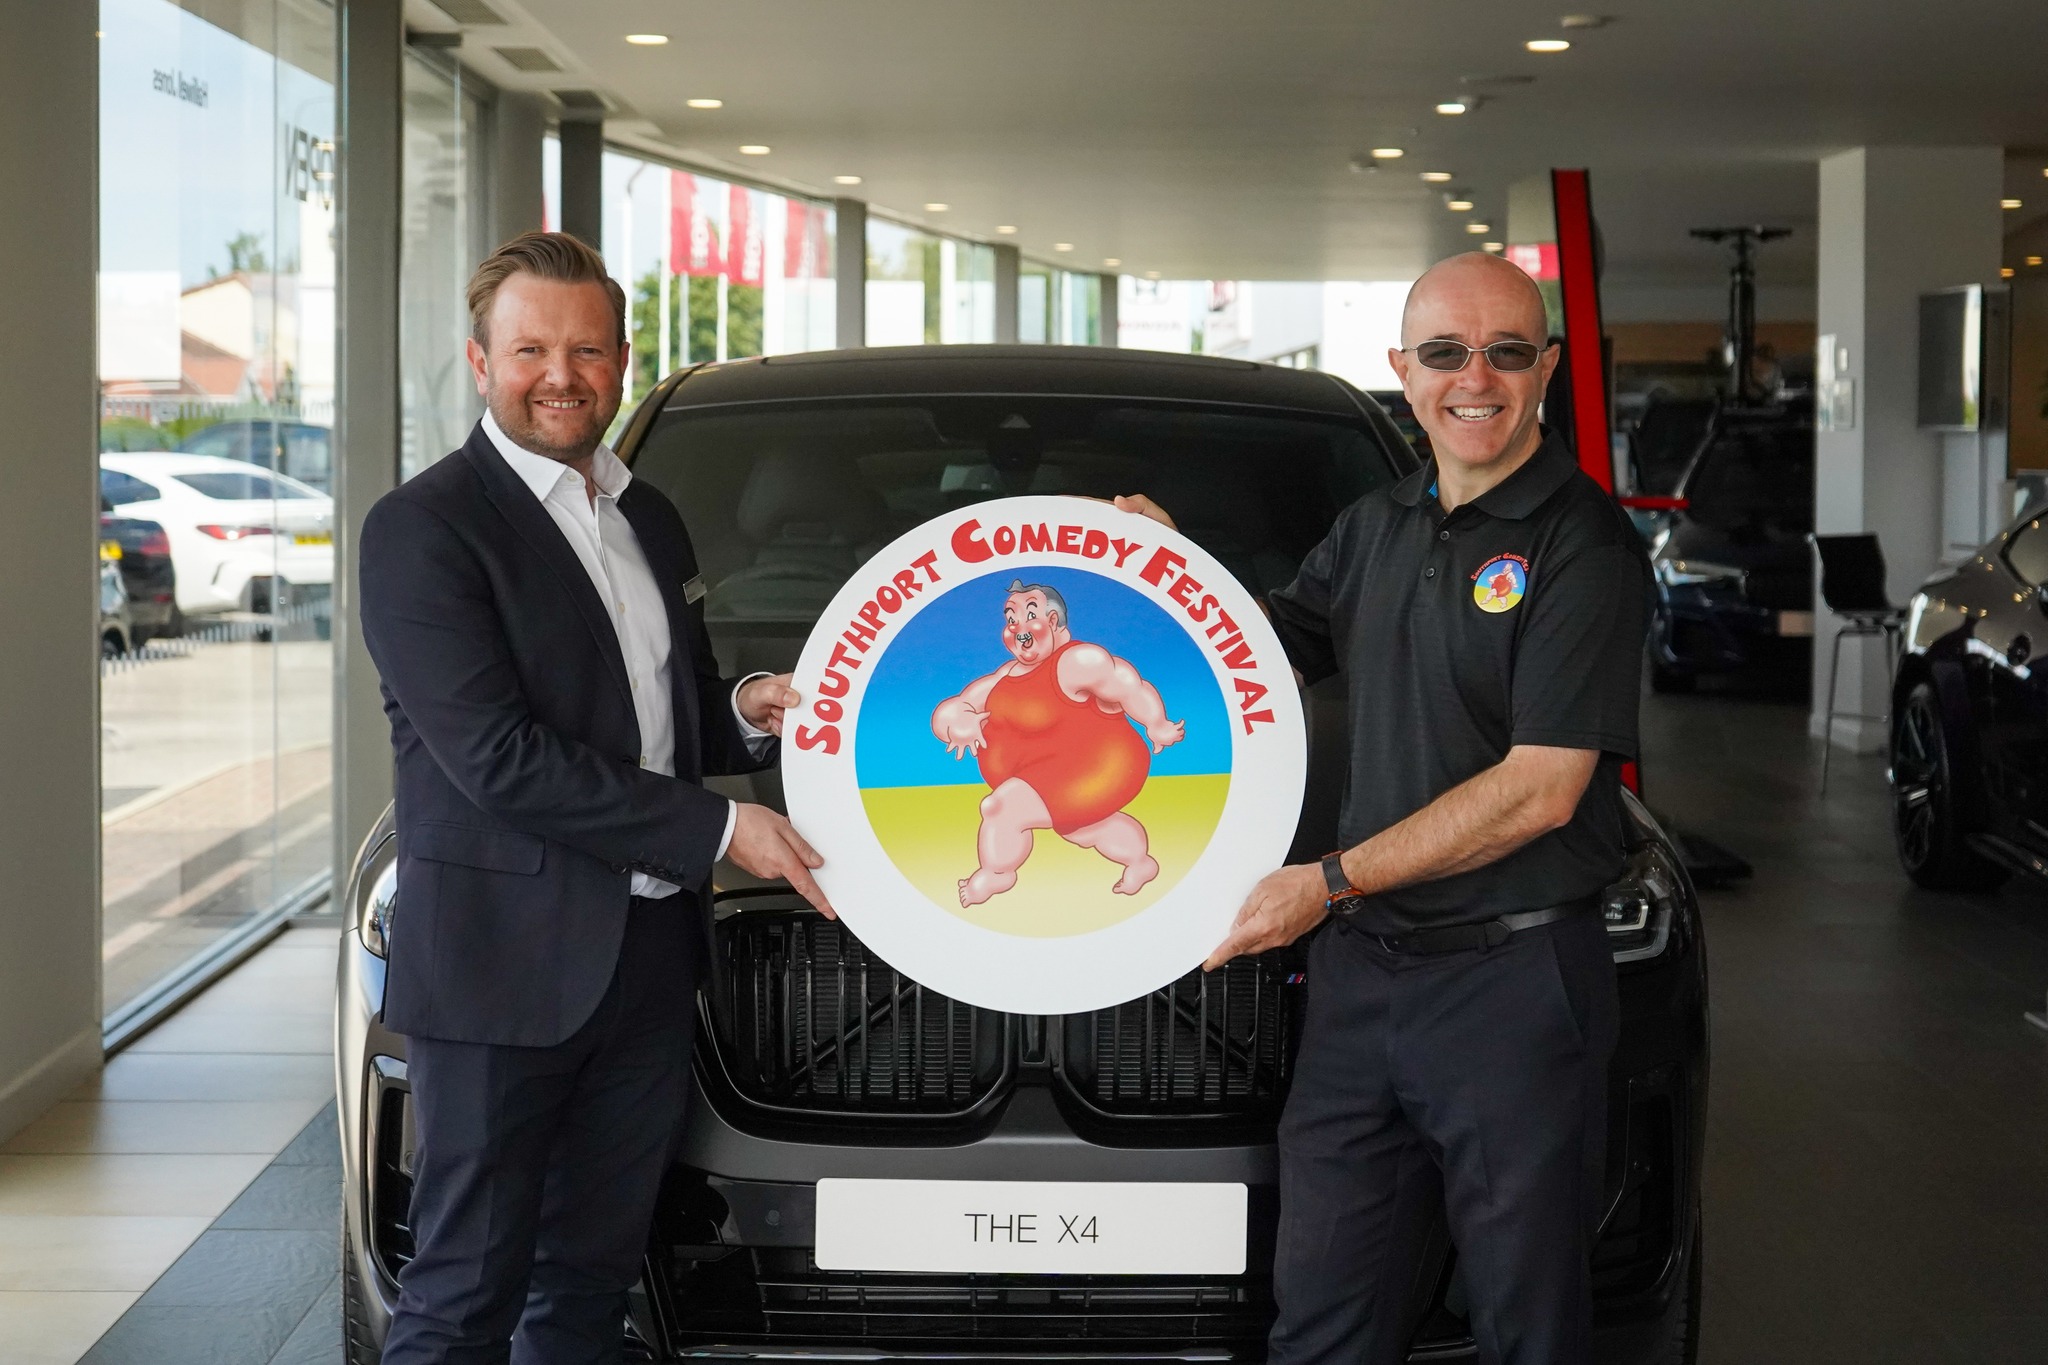 Halliwell Jones BMW is the associate partner of the Southport Comedy Festival 2022